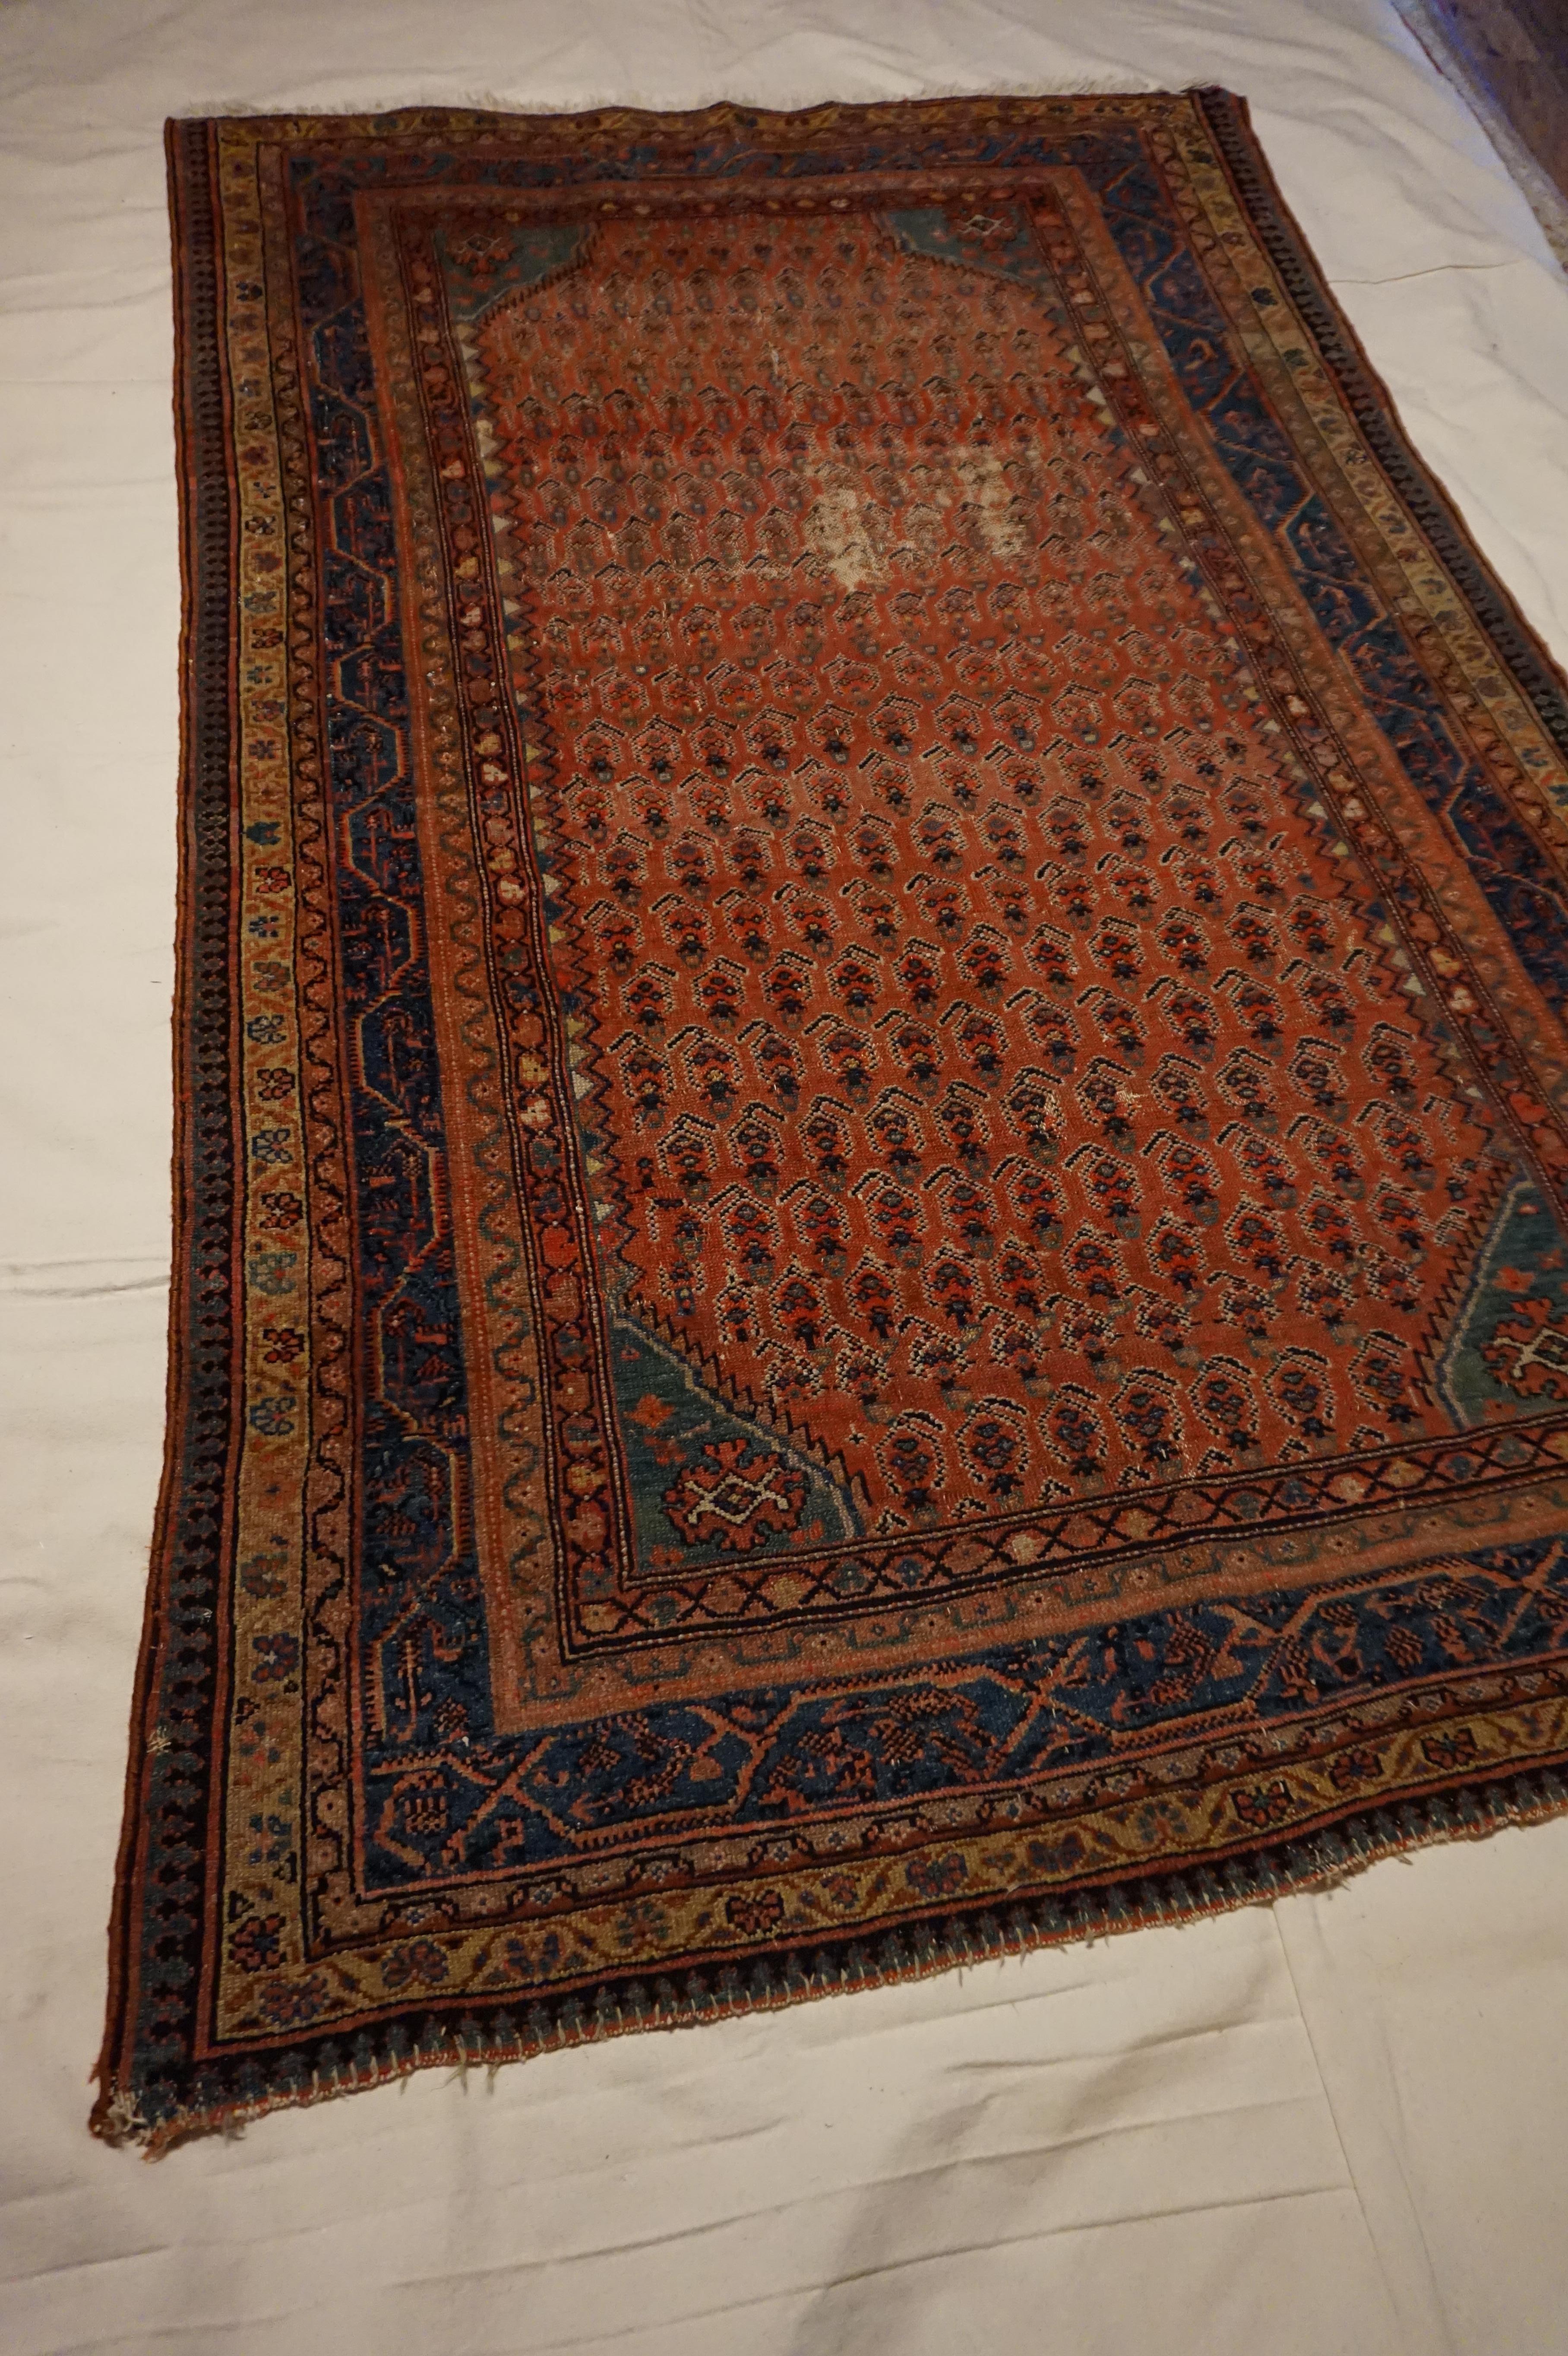 Azerbaijani 19th Century Tribal Boteh Paisley Hand-knotted Rug In Rust Hues For Sale